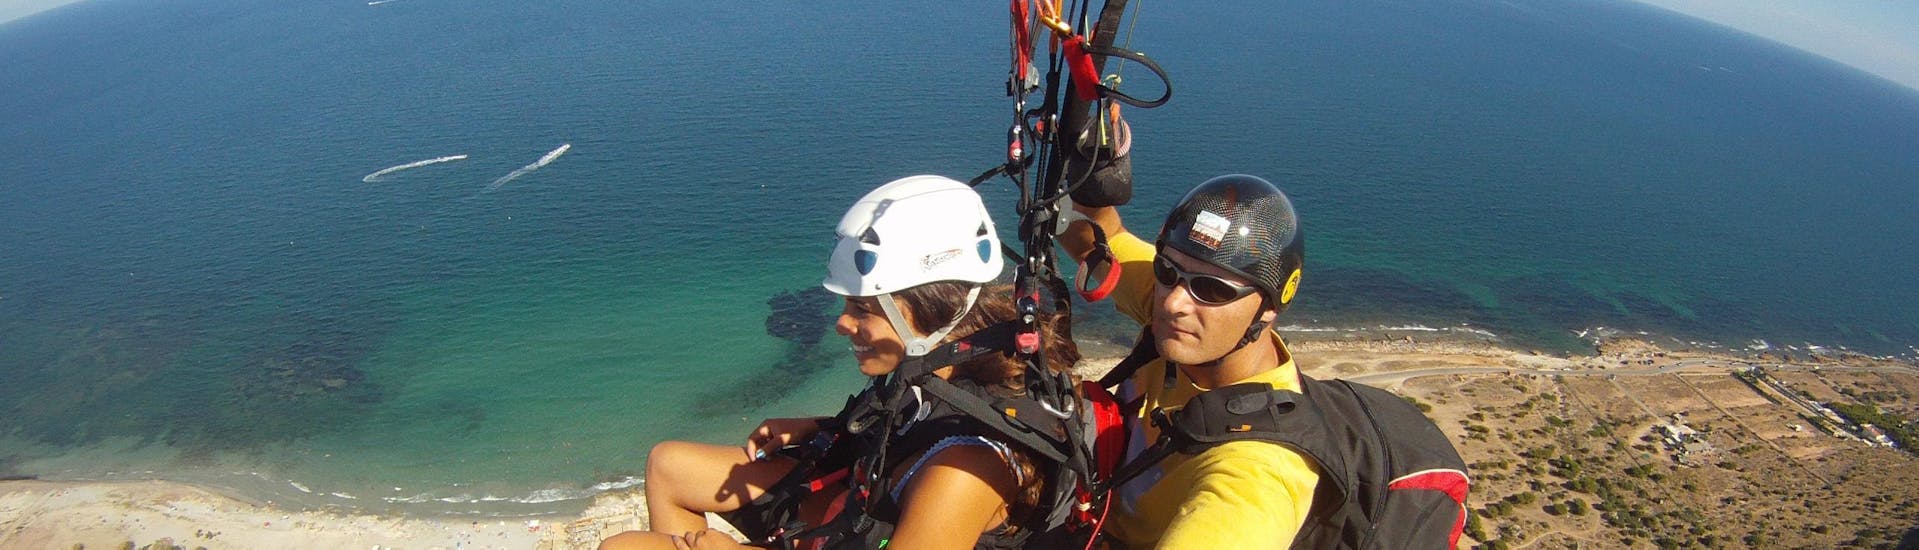 A young girl is doing the Tandem Paragliding at Costa Blanca - Panorama Flight with Parapente Santa Pola.